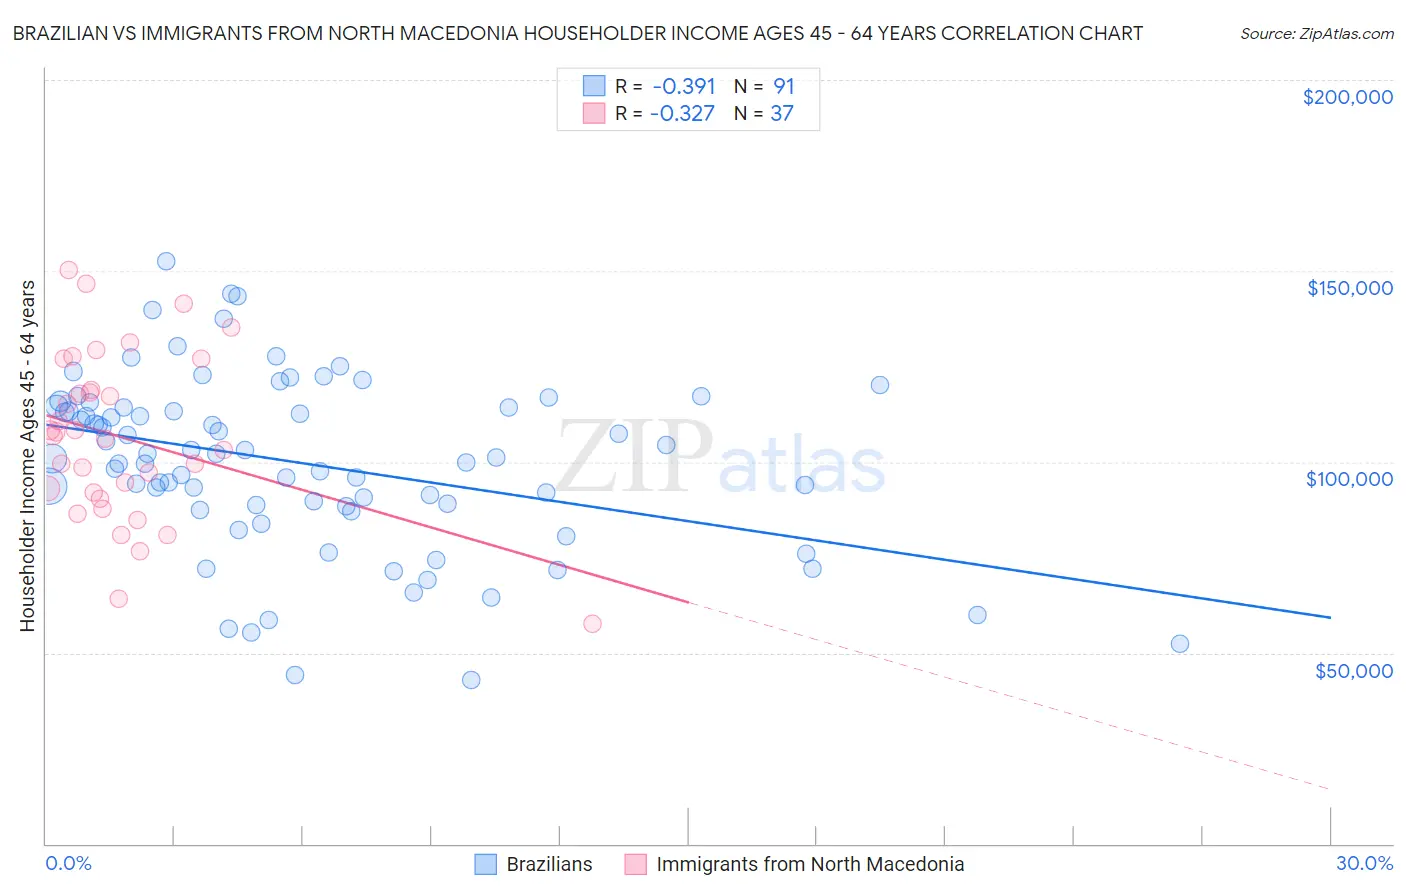 Brazilian vs Immigrants from North Macedonia Householder Income Ages 45 - 64 years